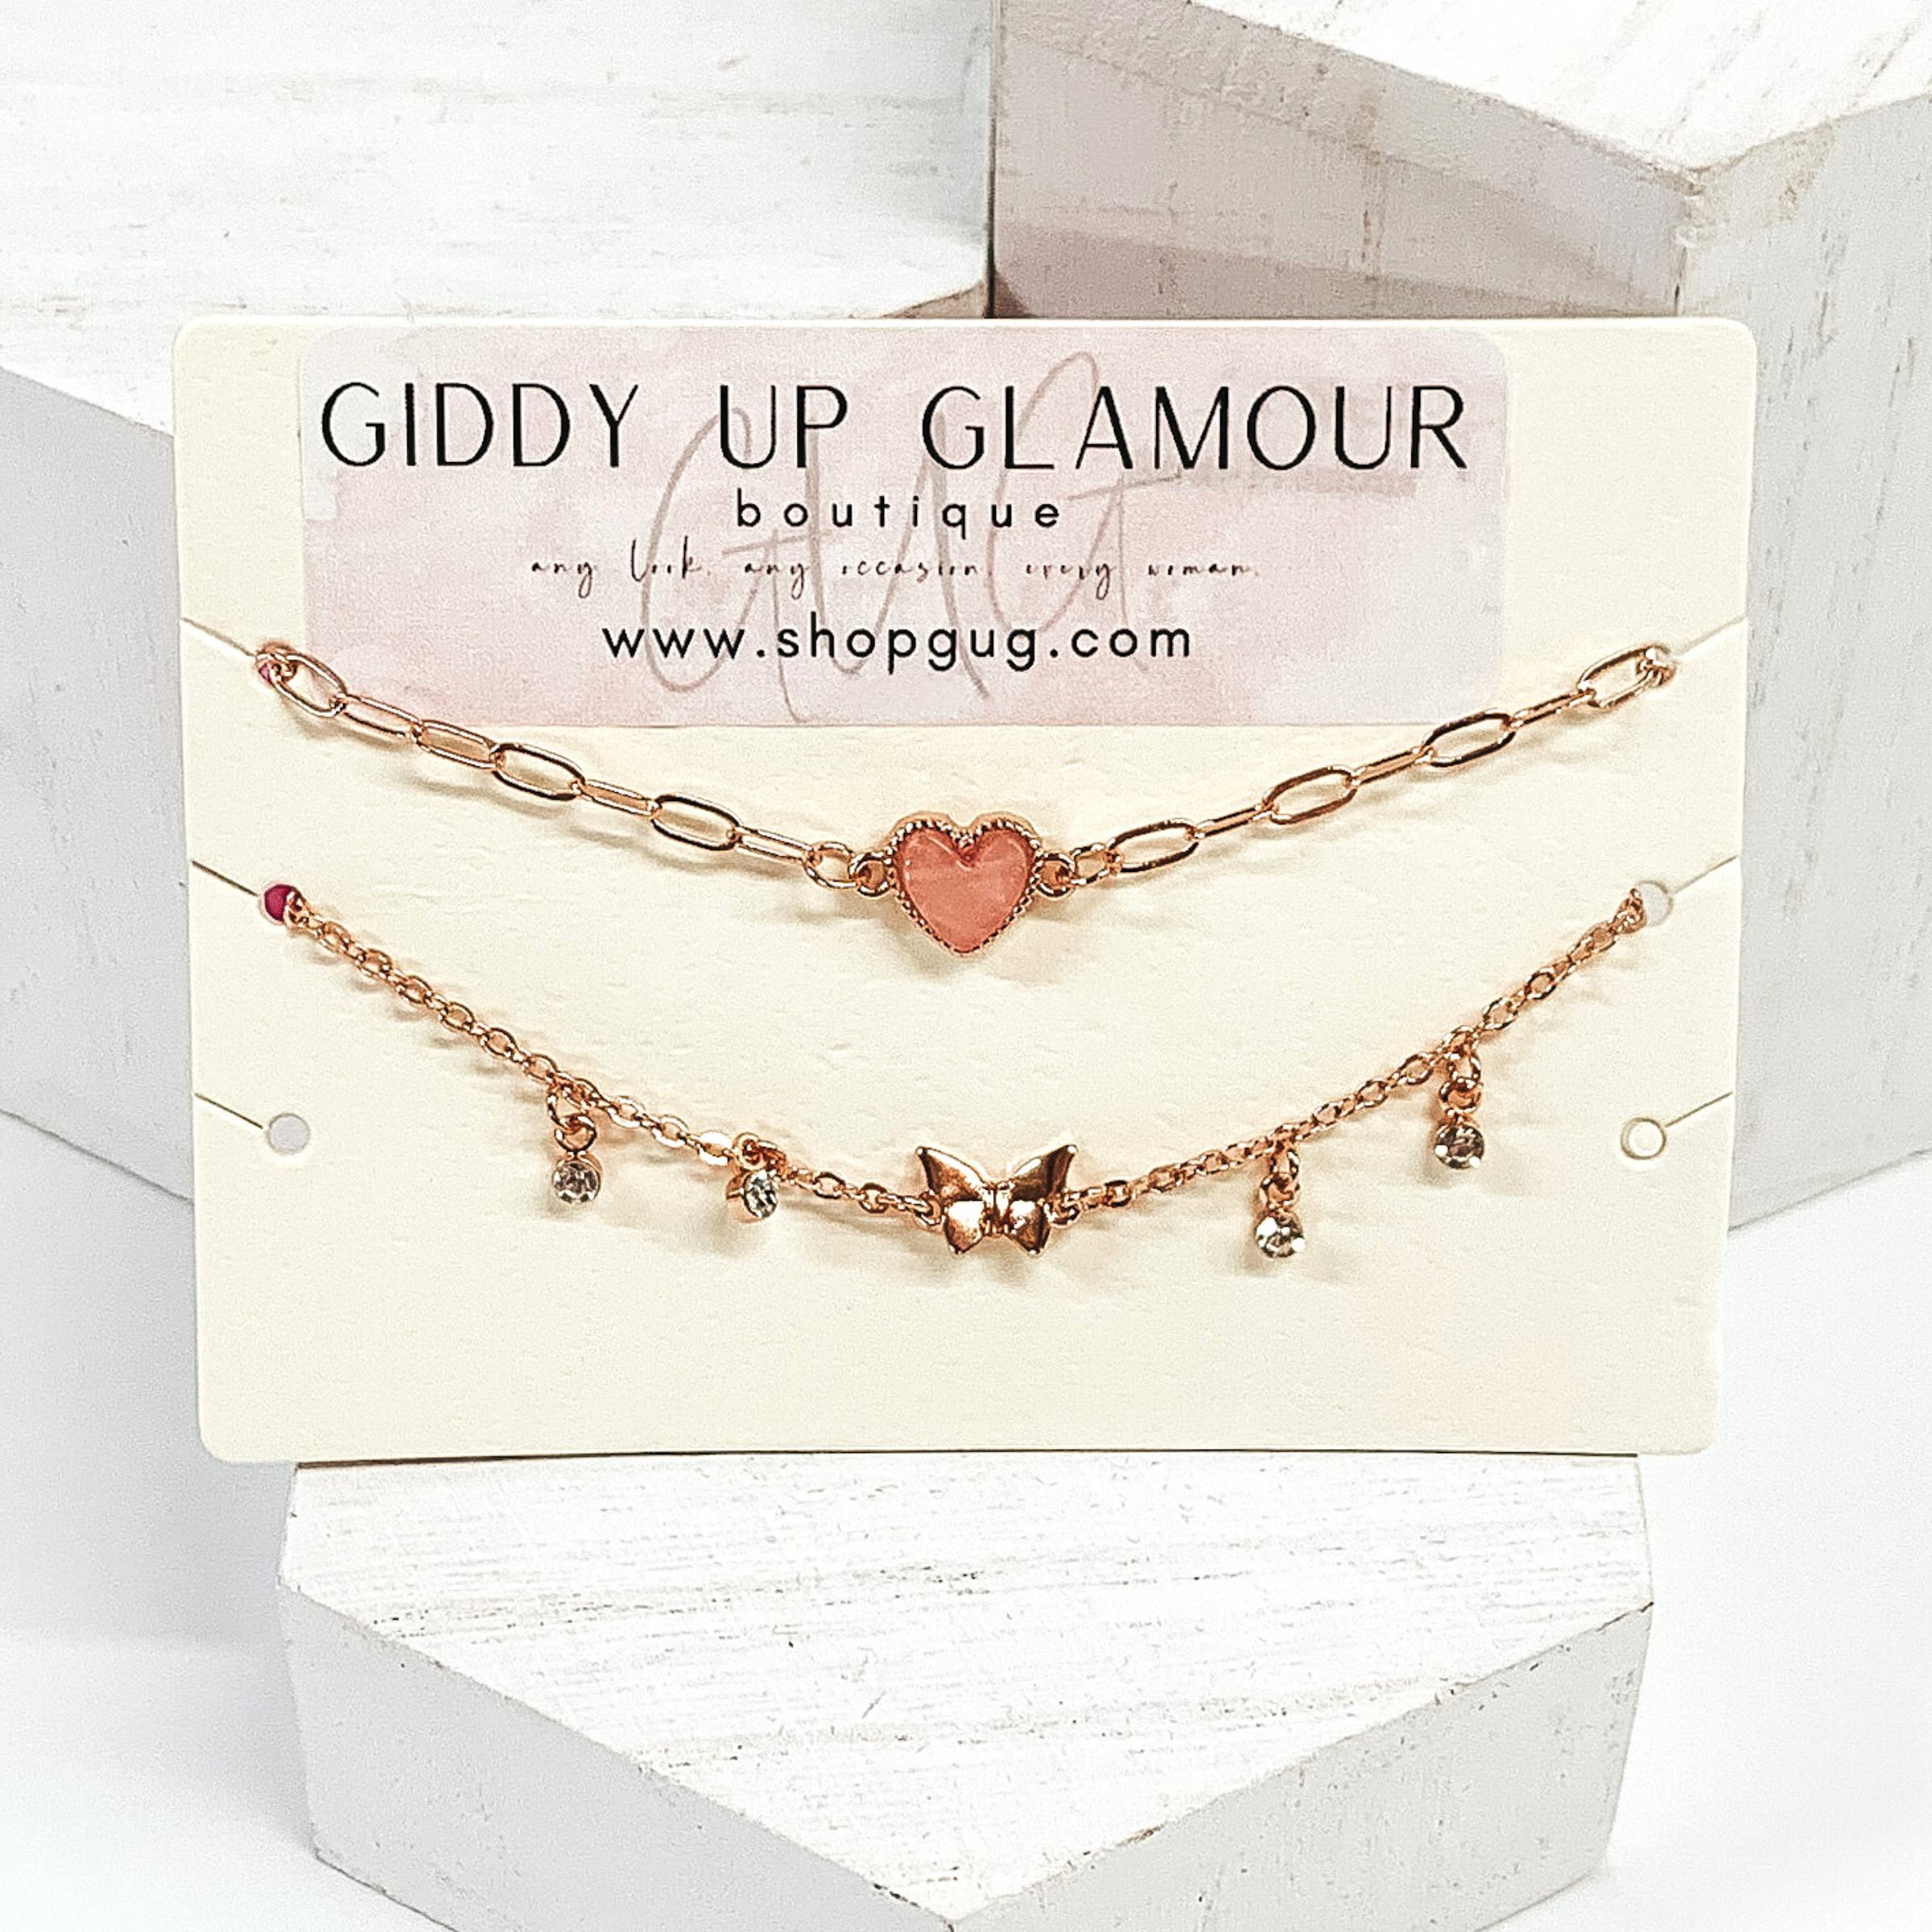 Two gold chained anklets. One anklet has a blush colored heart harm. The second anklet has a small butterfly charm with tiny crystal drop charms surrounding it. These are pictured on a white background. 